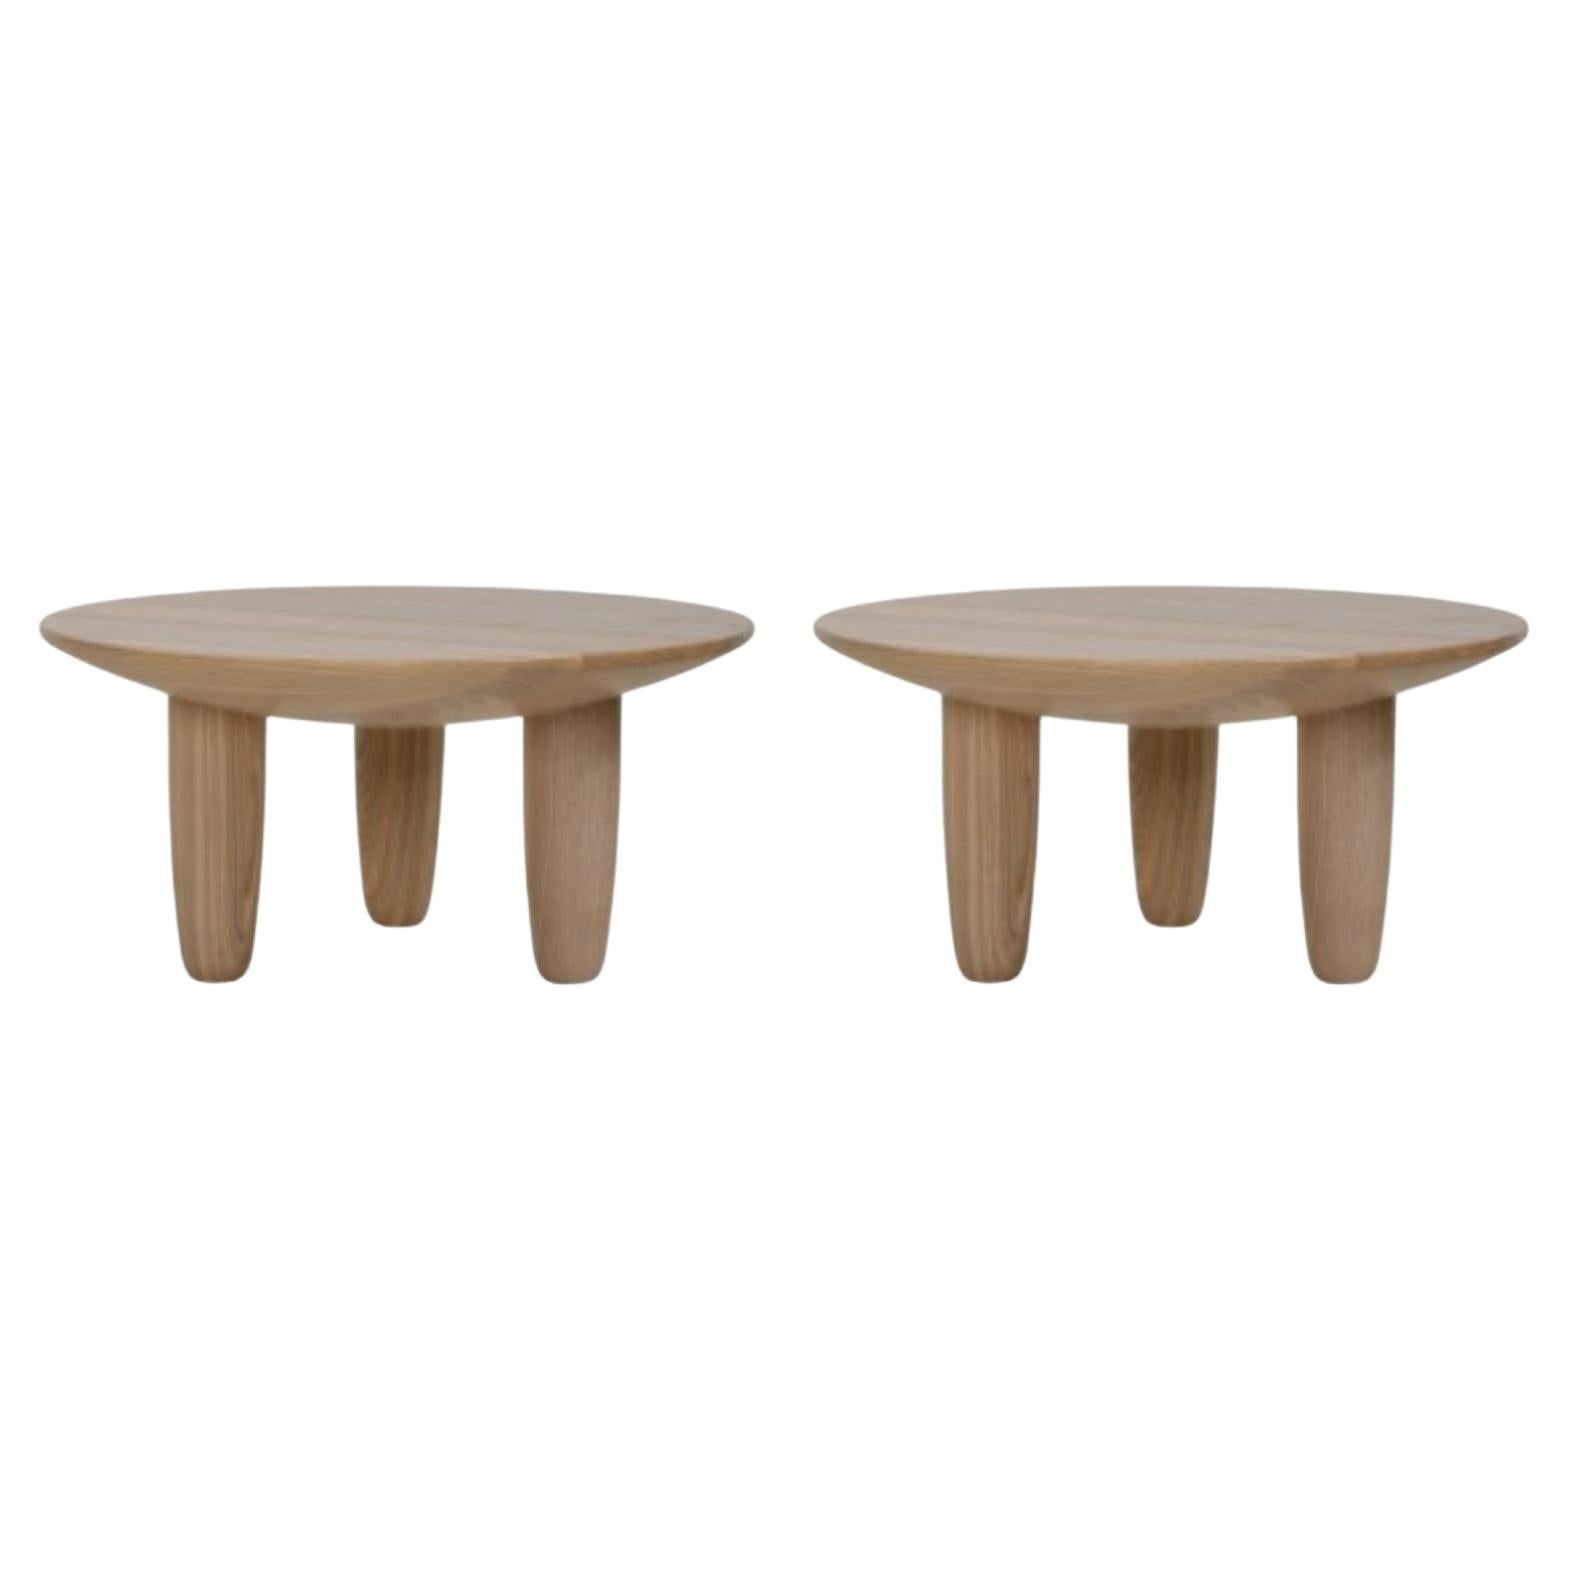 Set of 2 Ash Contemporary Coffee Tables by Faina